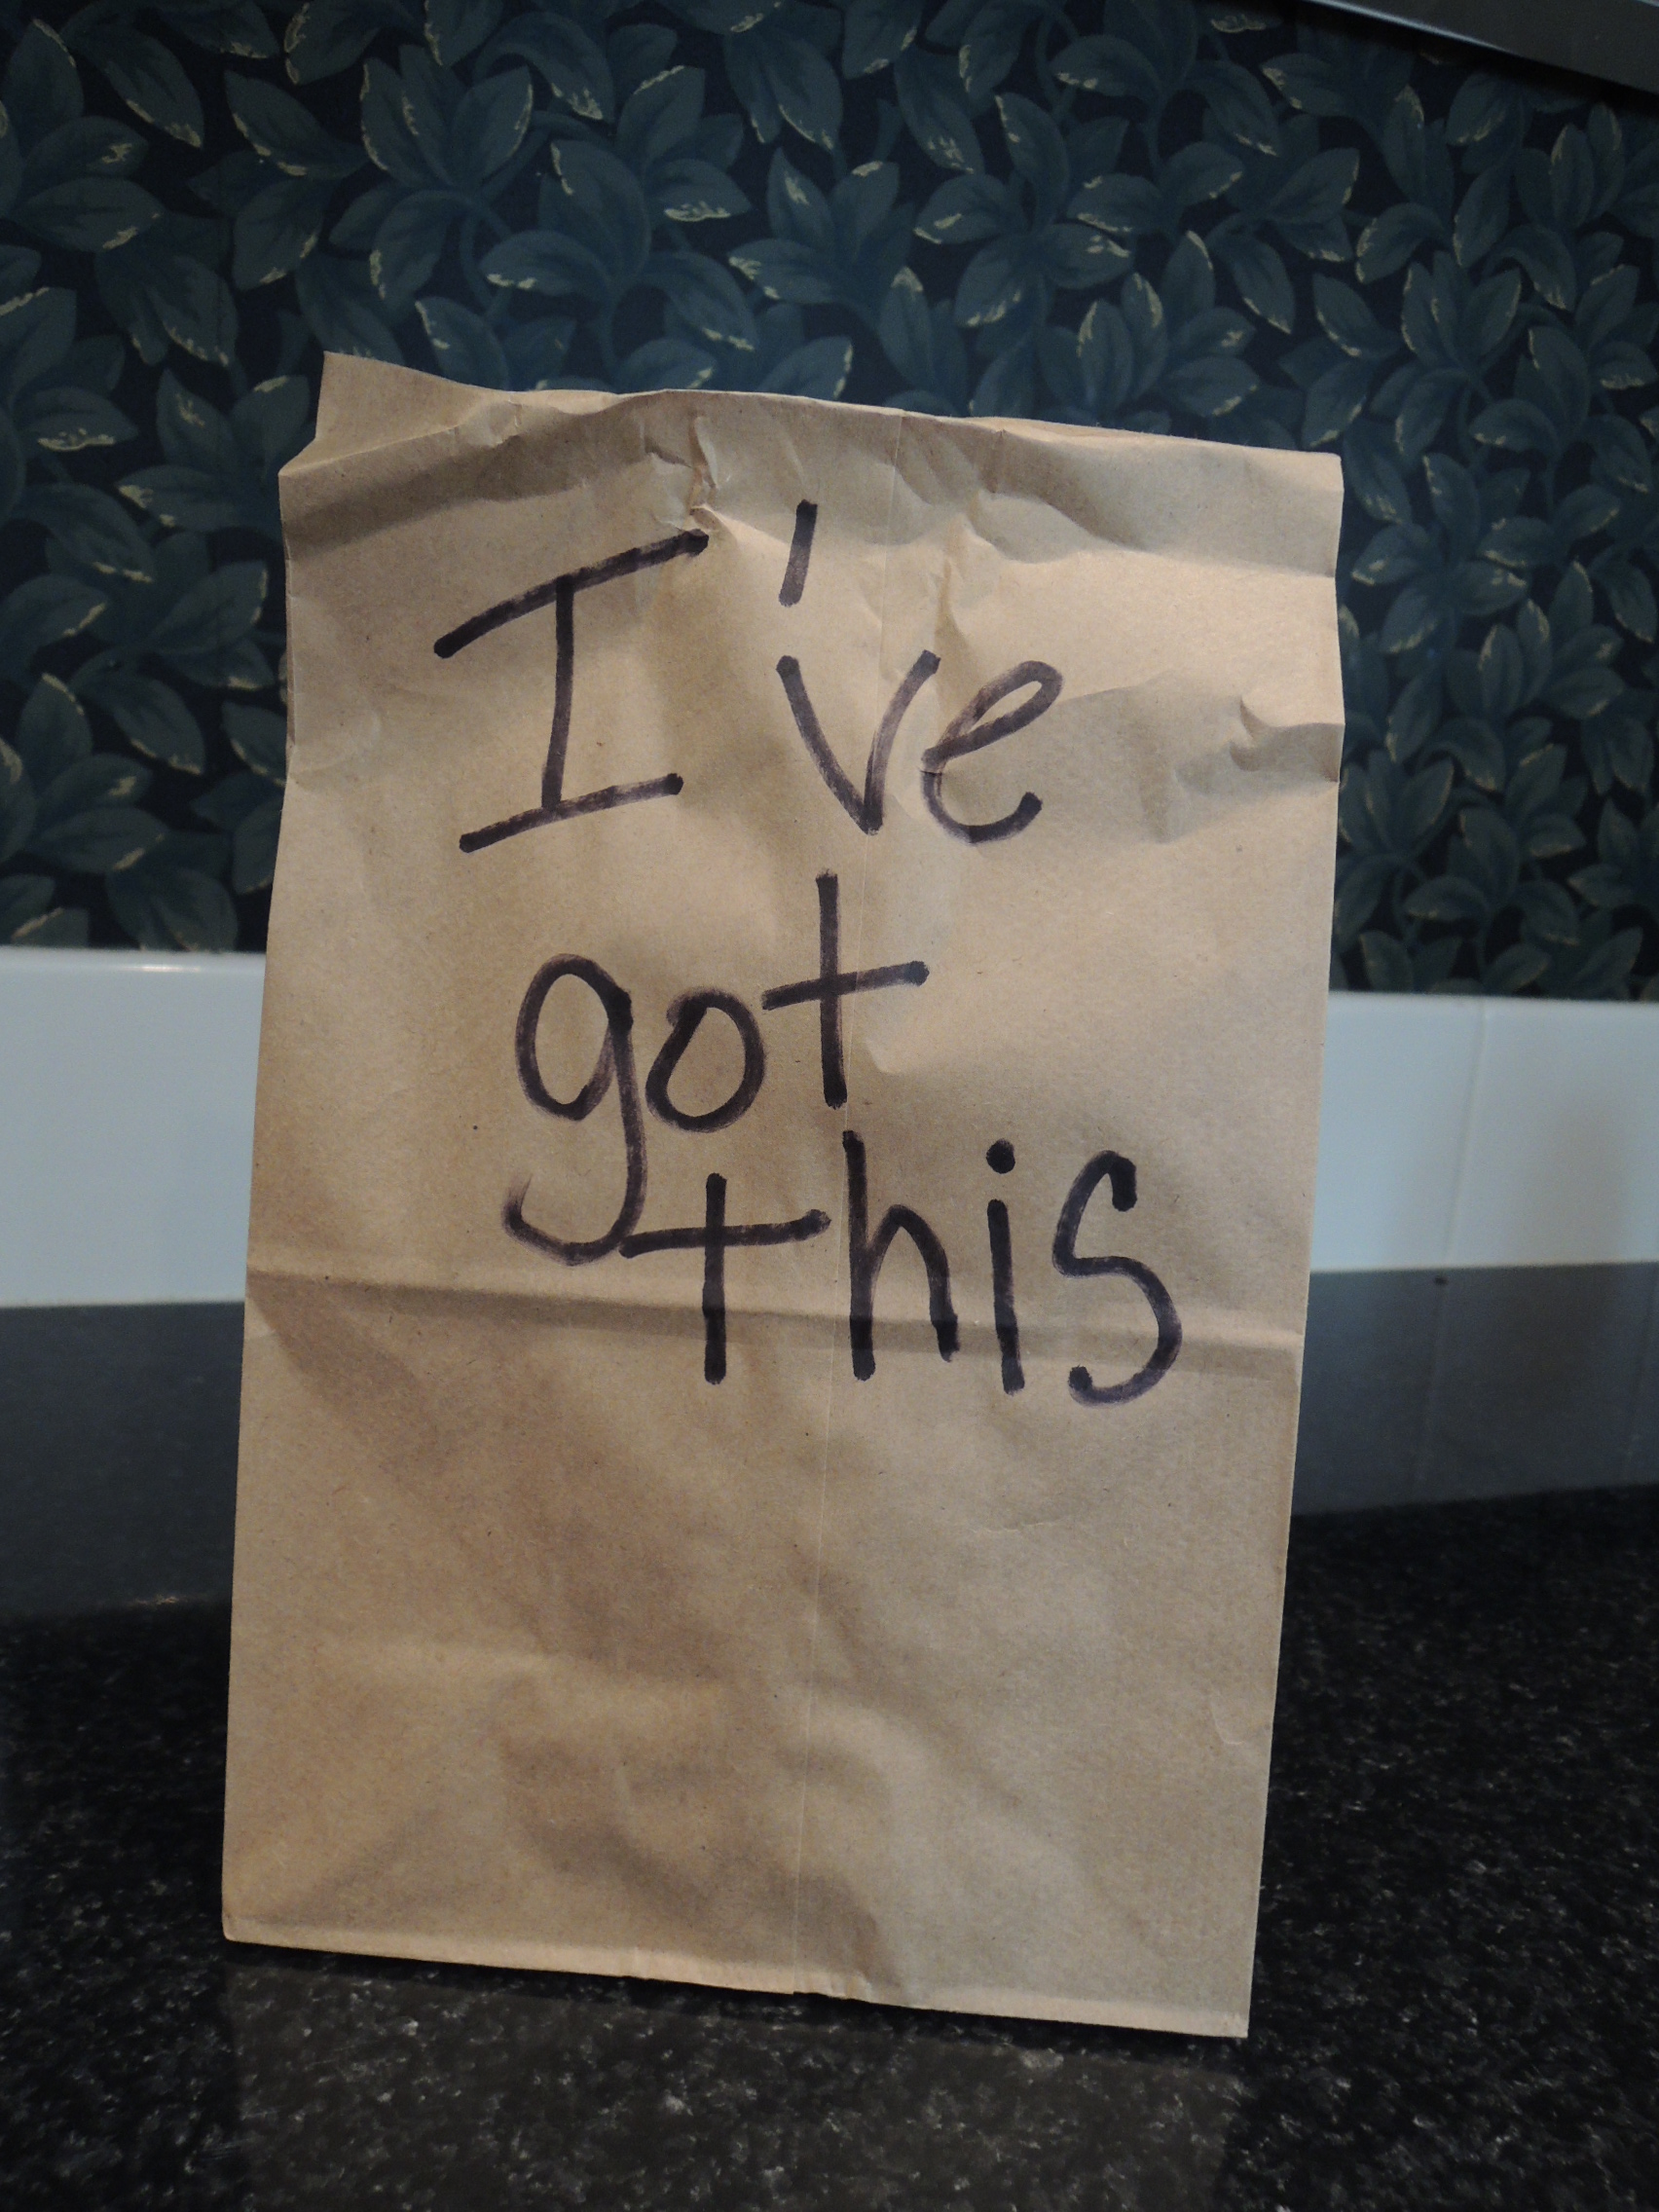 Brown Bag I Ve Got This The People Equation